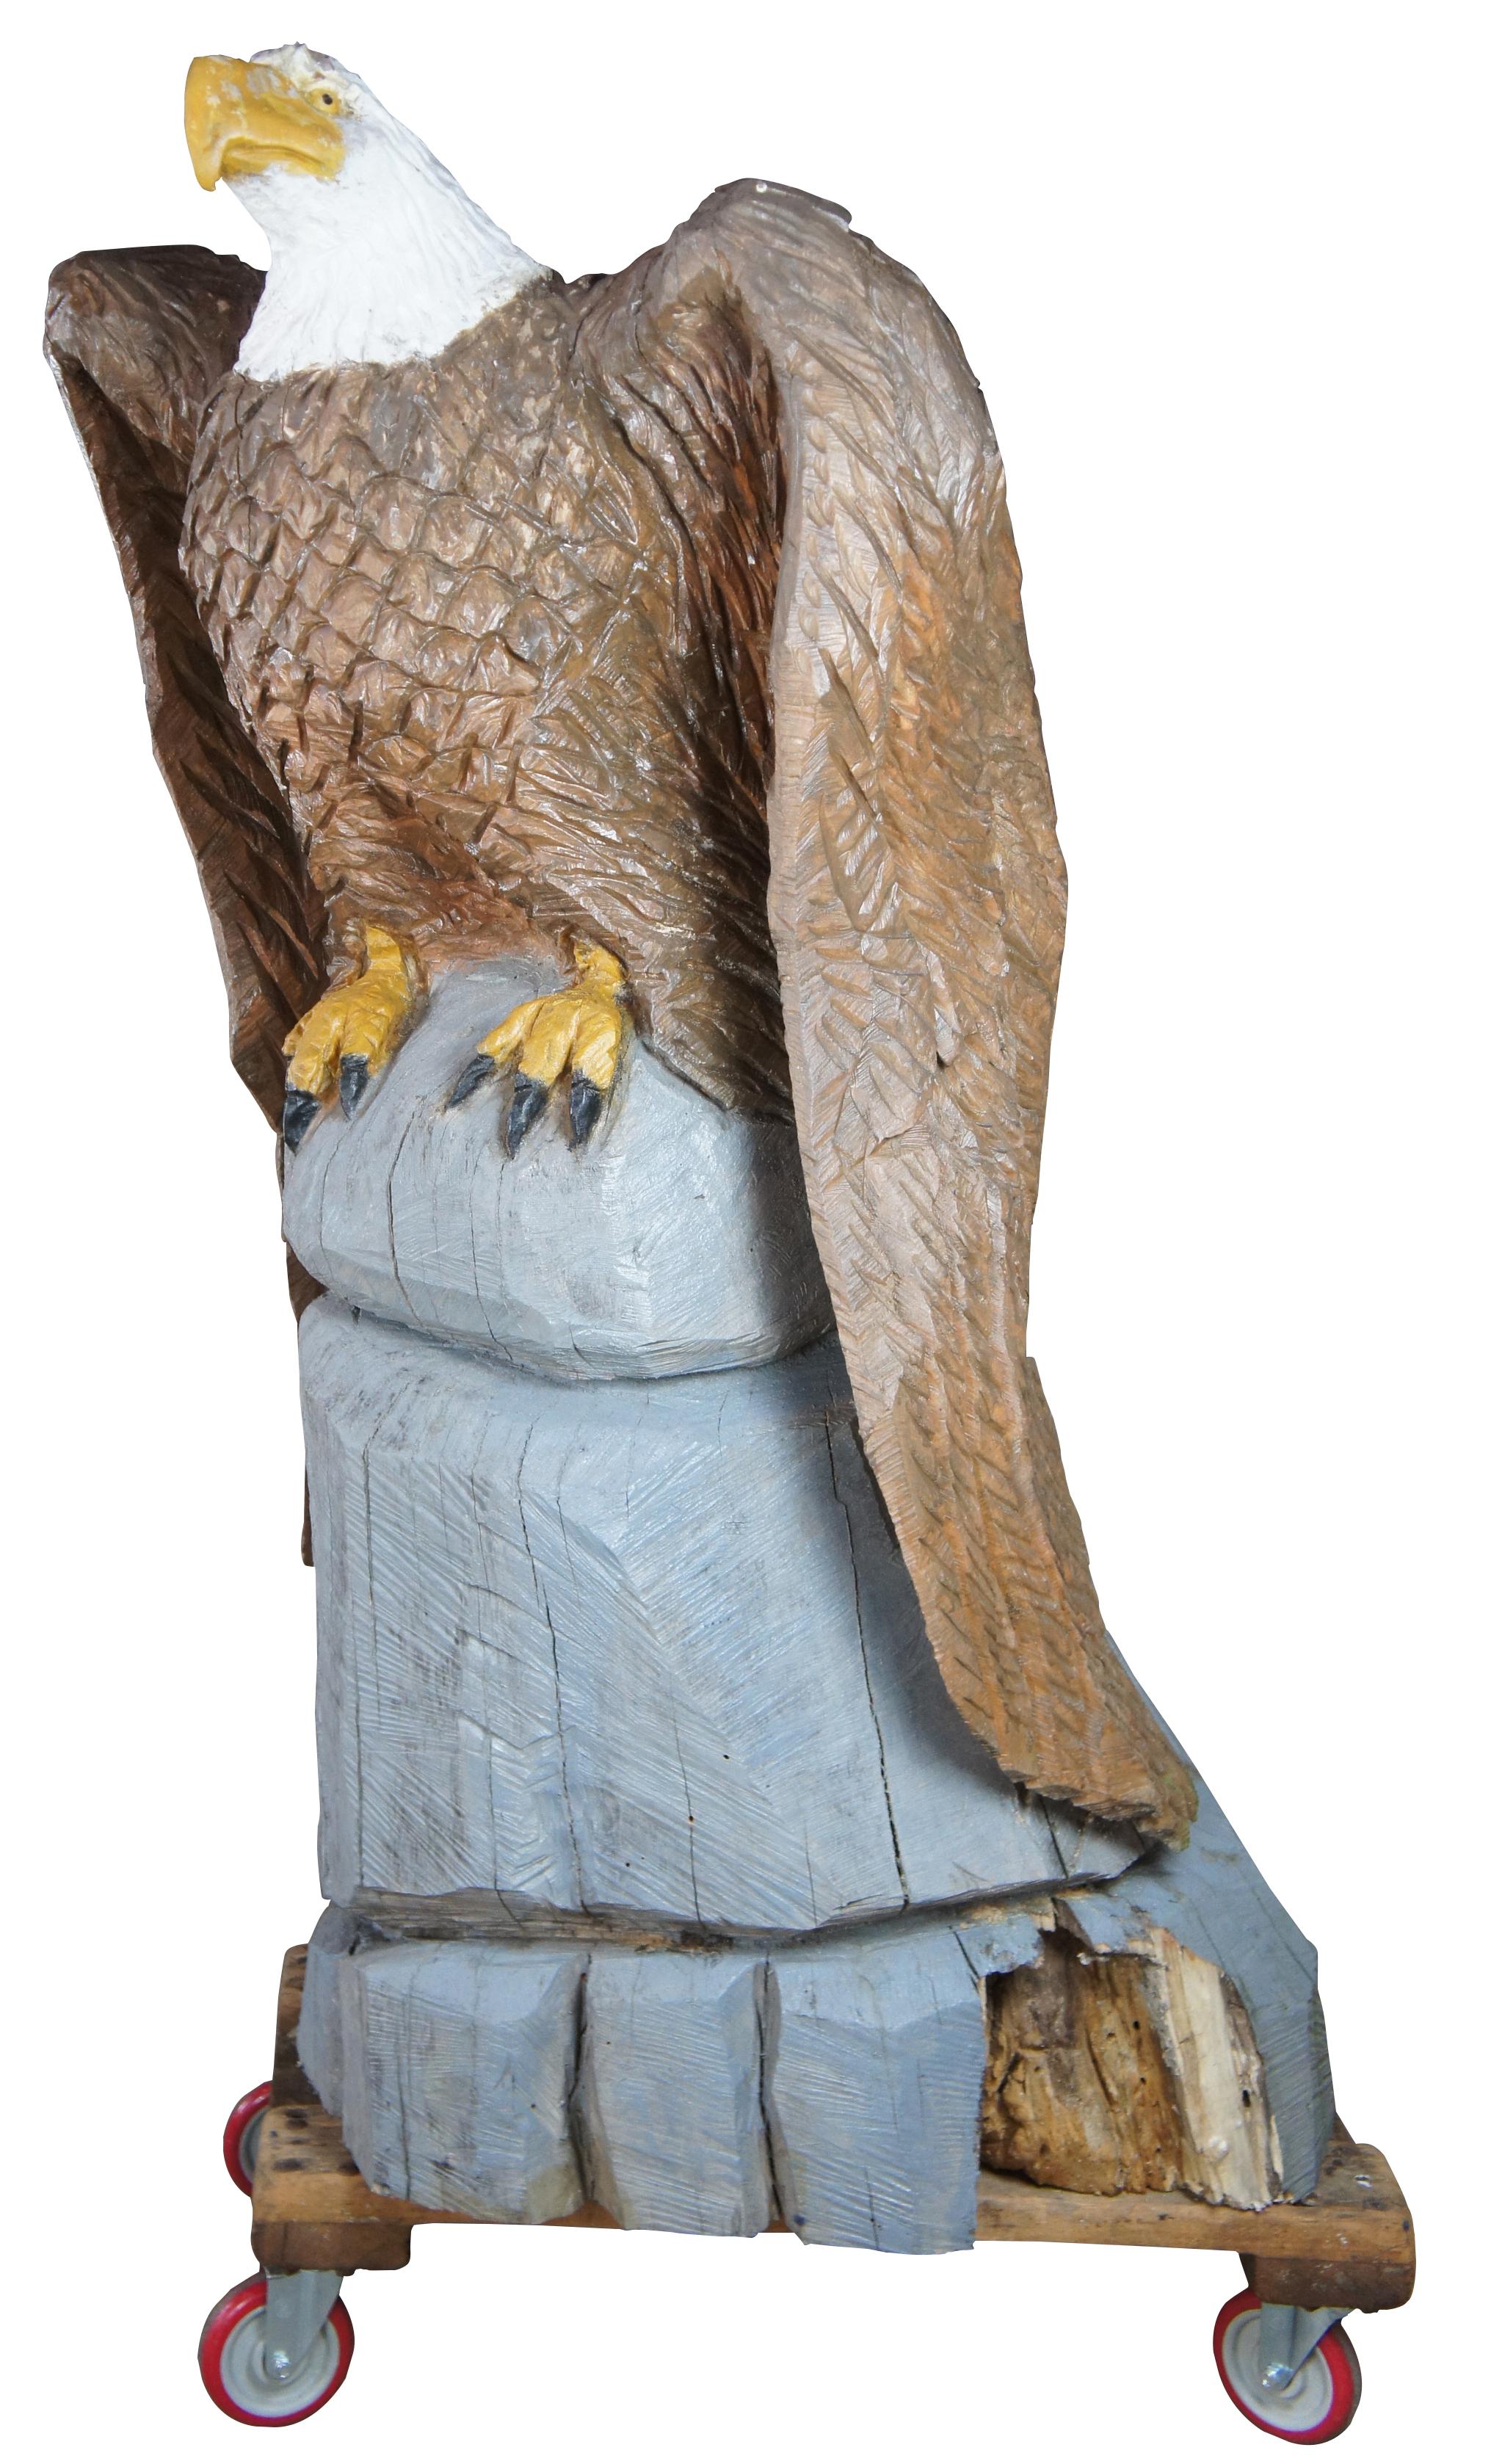 American Craftsman Dayle Lewis American Bald Eagle Carved Tree Art Sculpture Statue